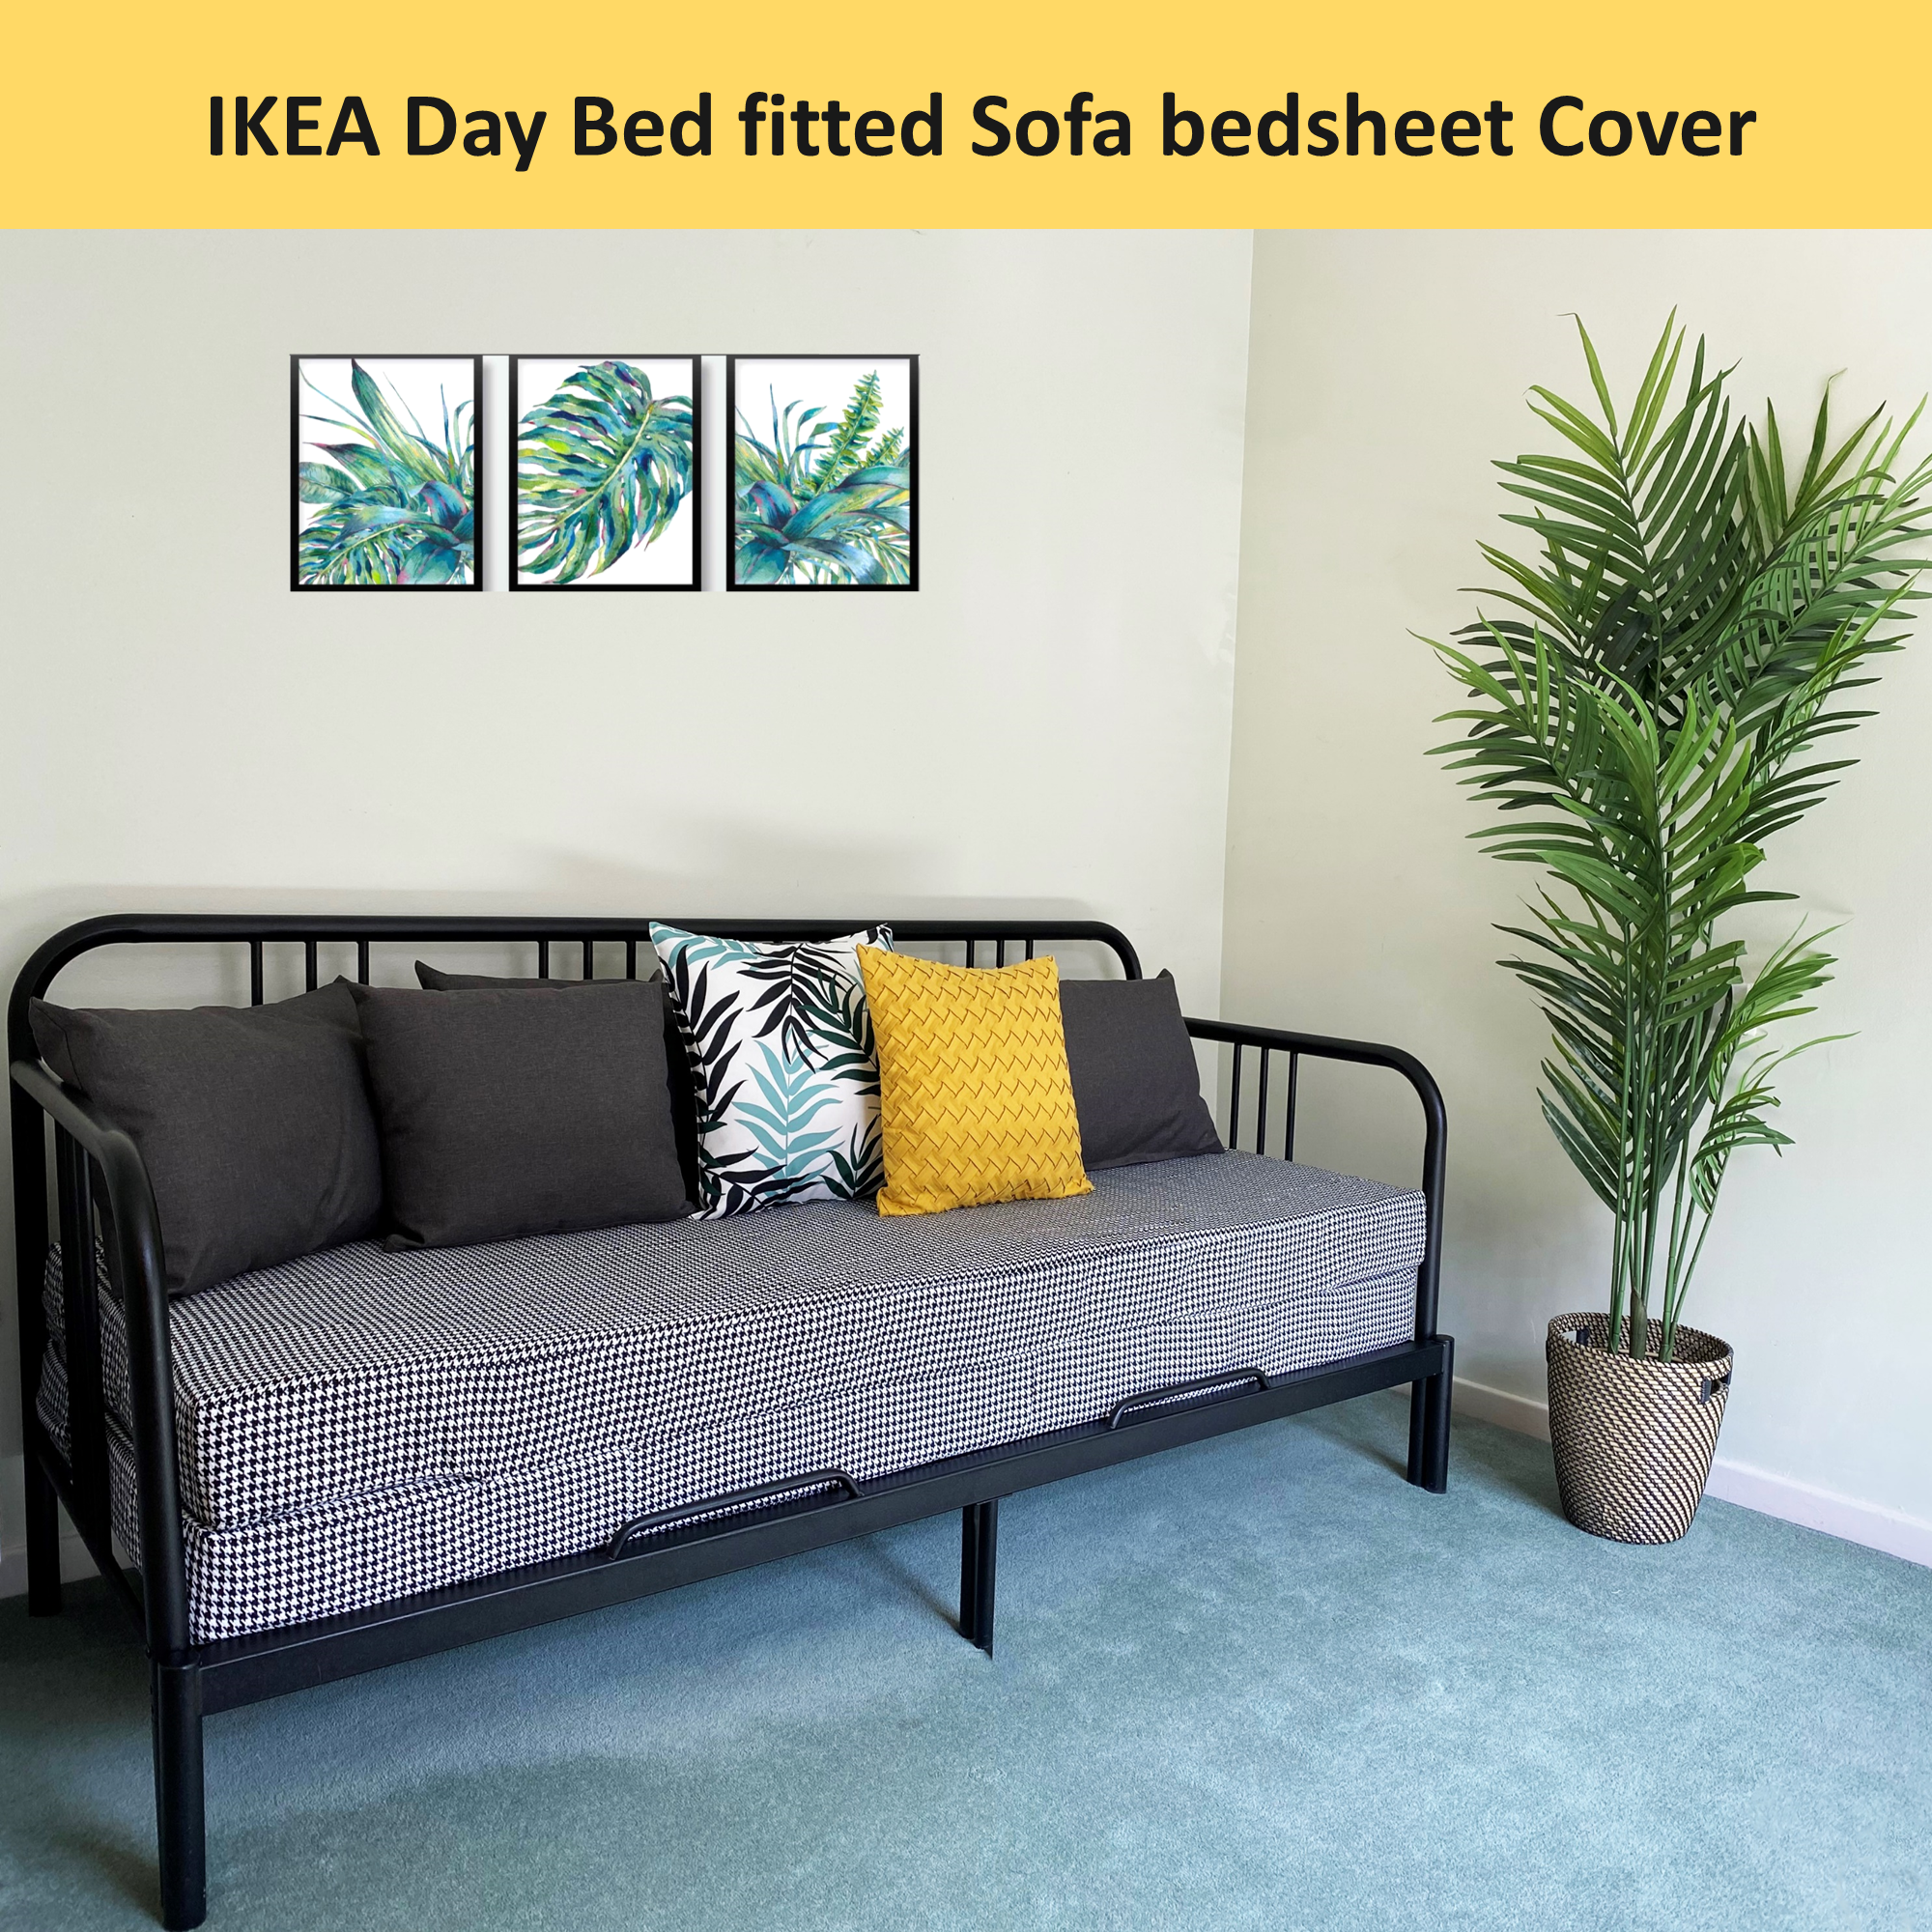 IKEA-DayBed-Sofa-Fitted-Bedsheet-double-Mattress-Cover